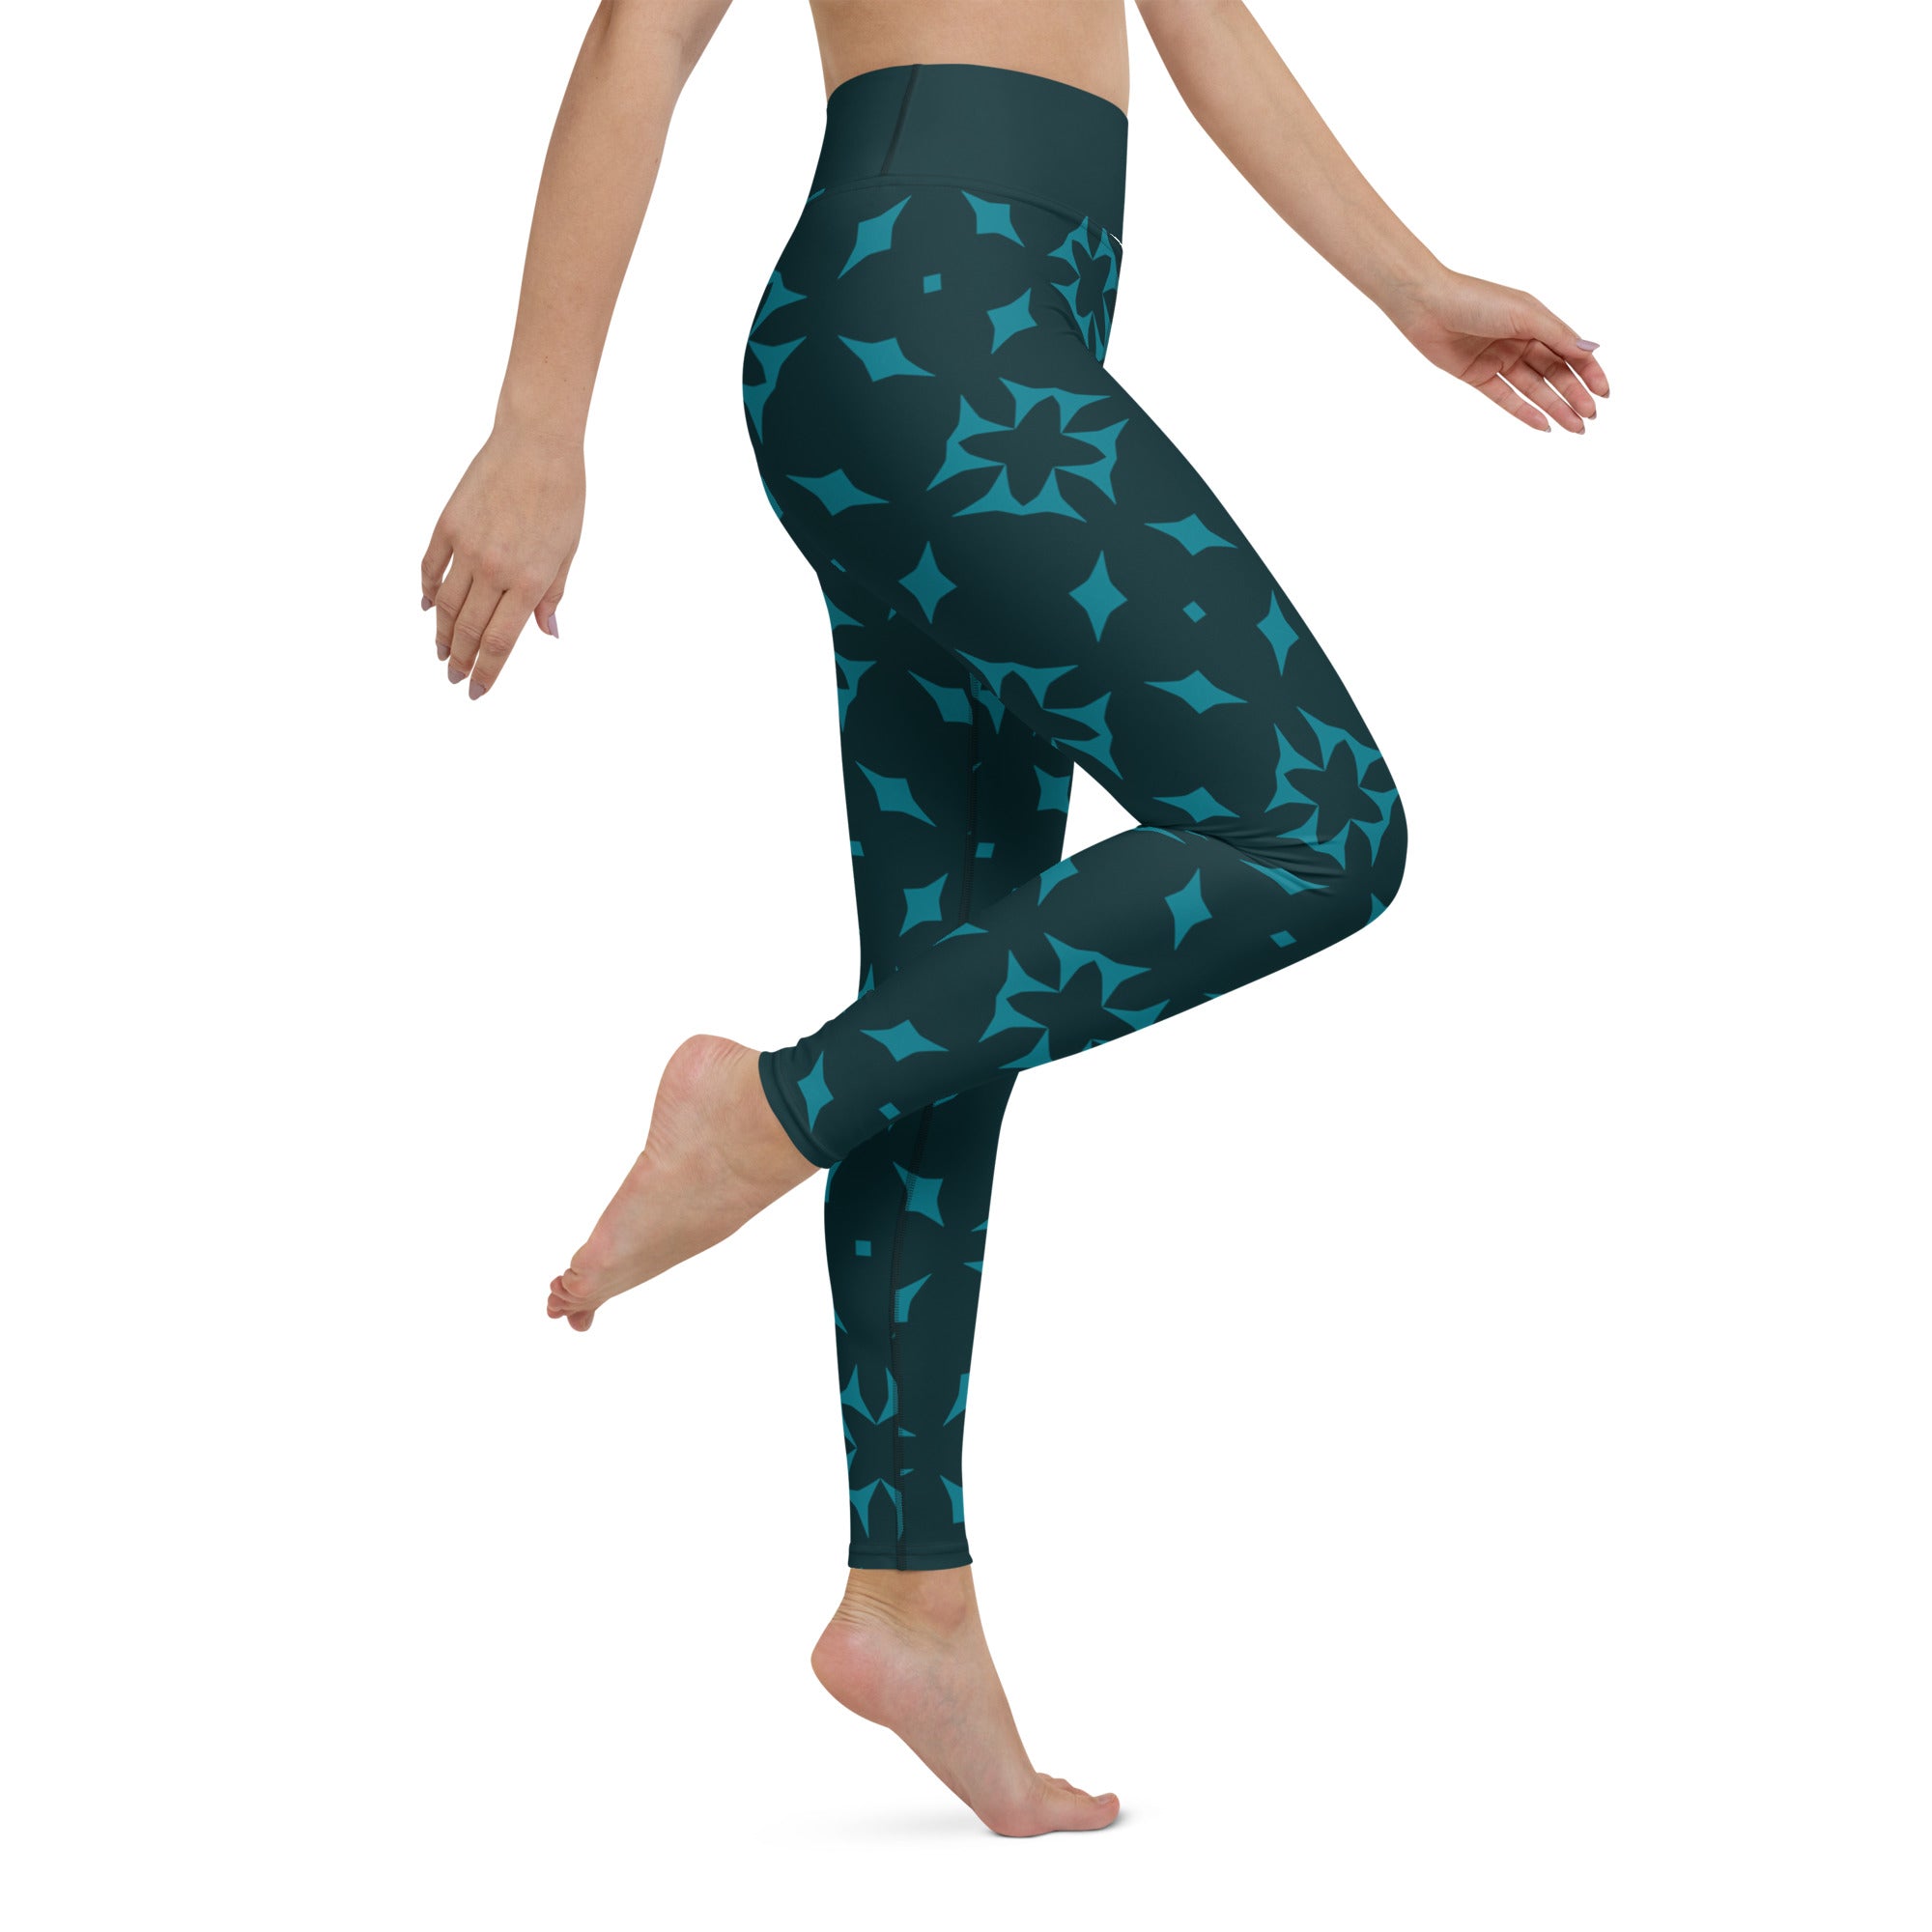 Serenity Sway Yoga Leggings color options and design details